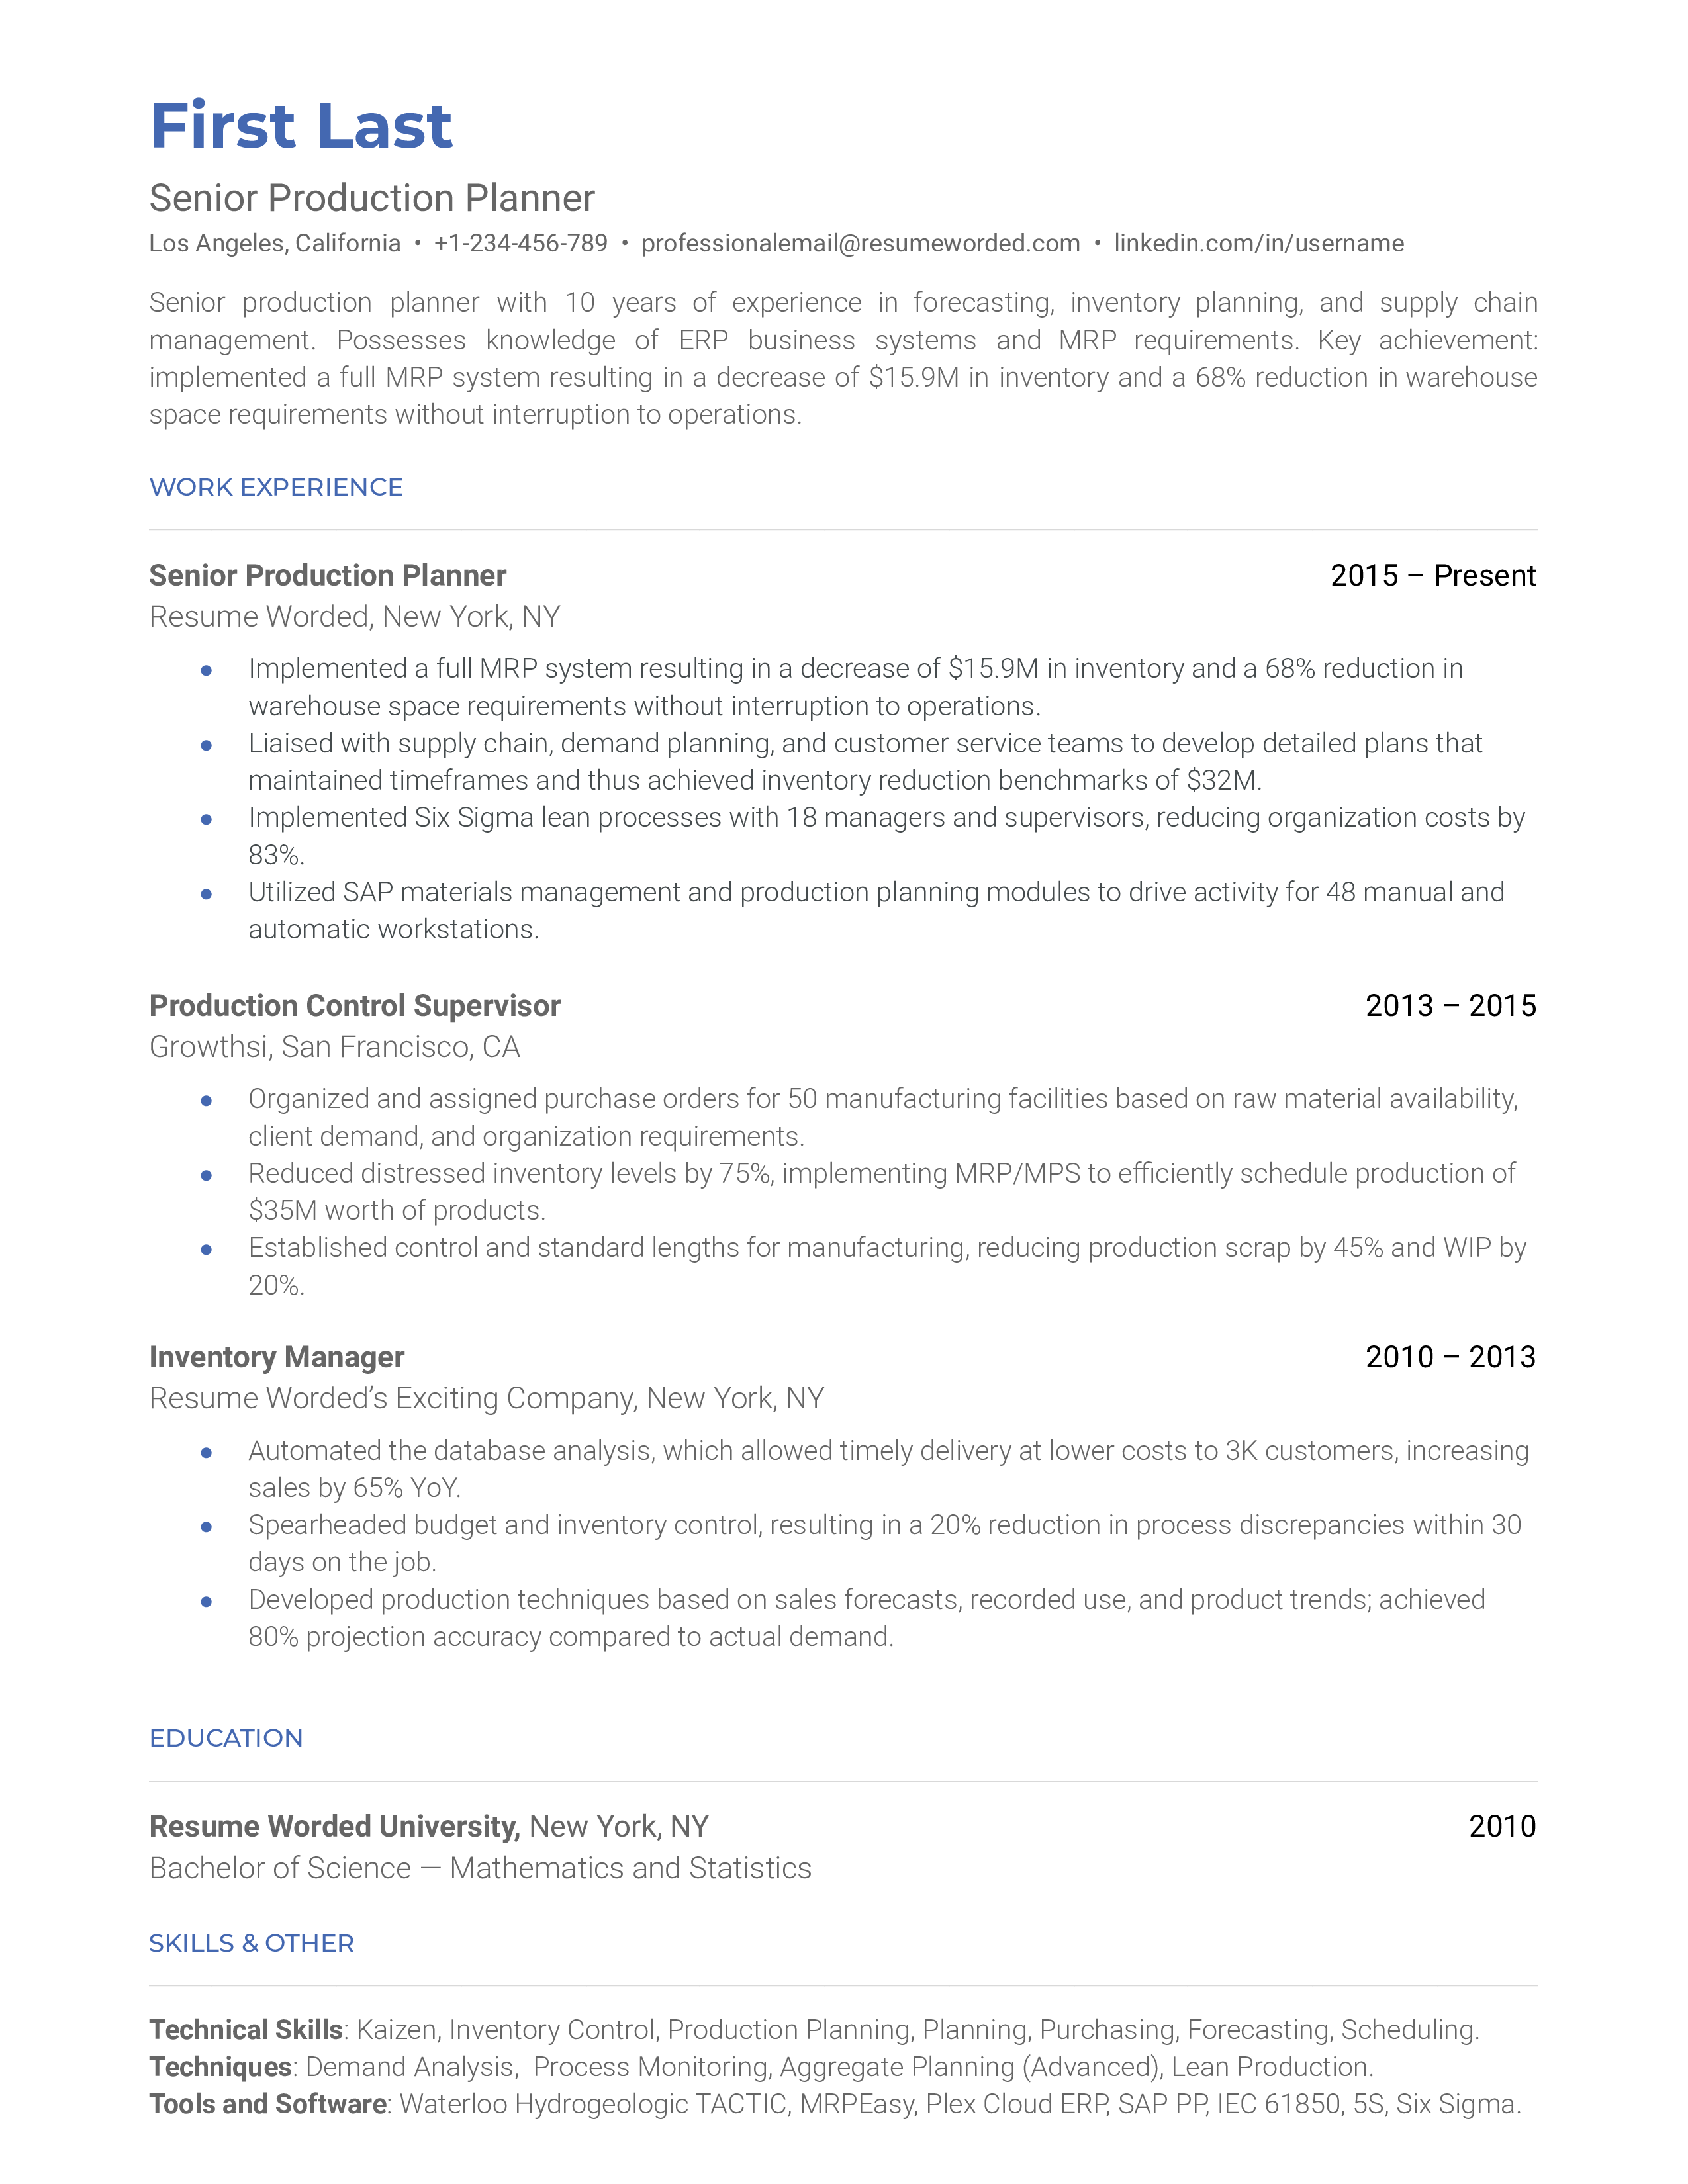 A senior production planner resume template that organizes experience chronologically